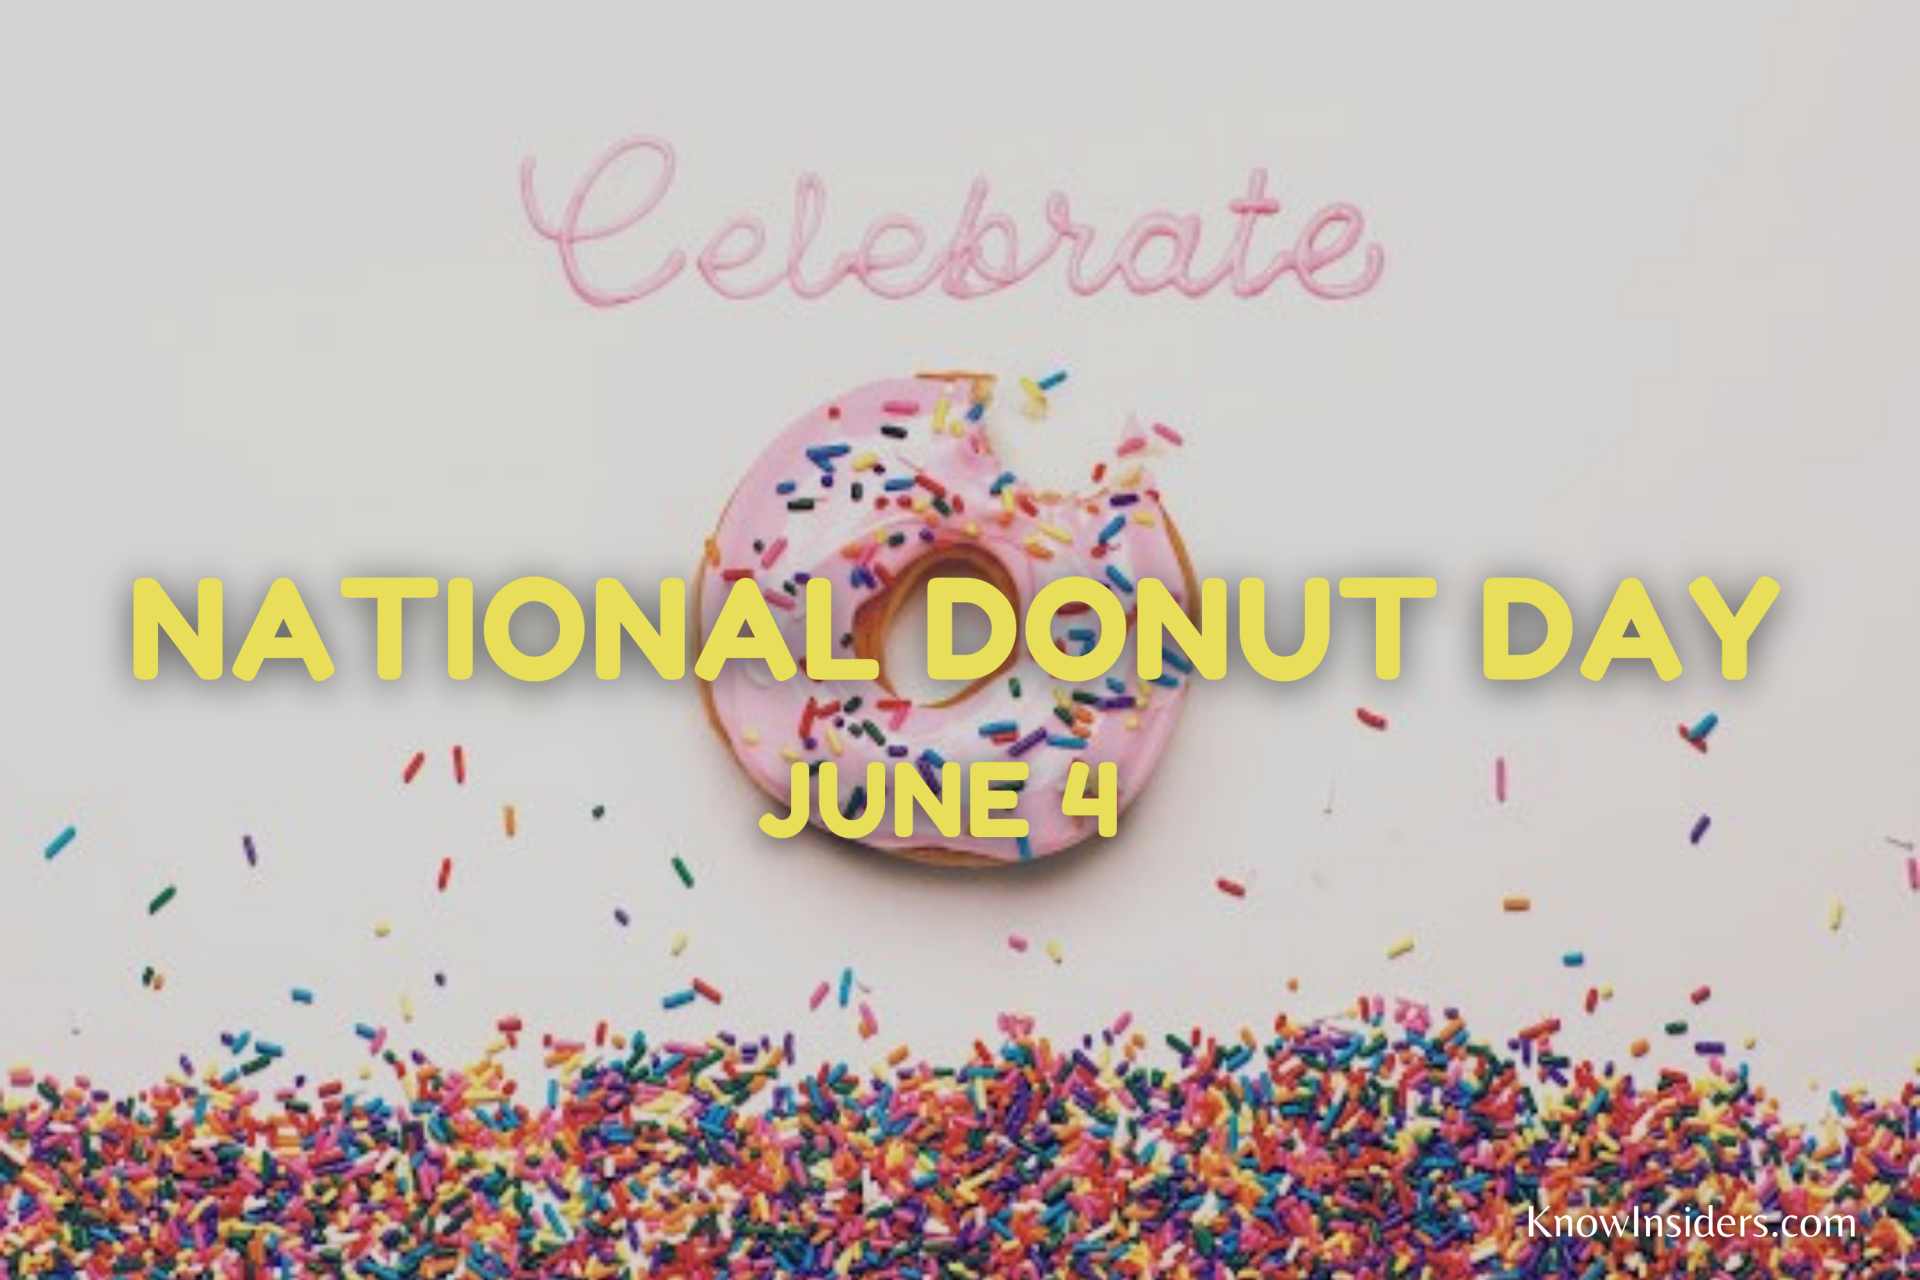 National Donut Day: How to get a Free Donut, History, Significance and Celebrations